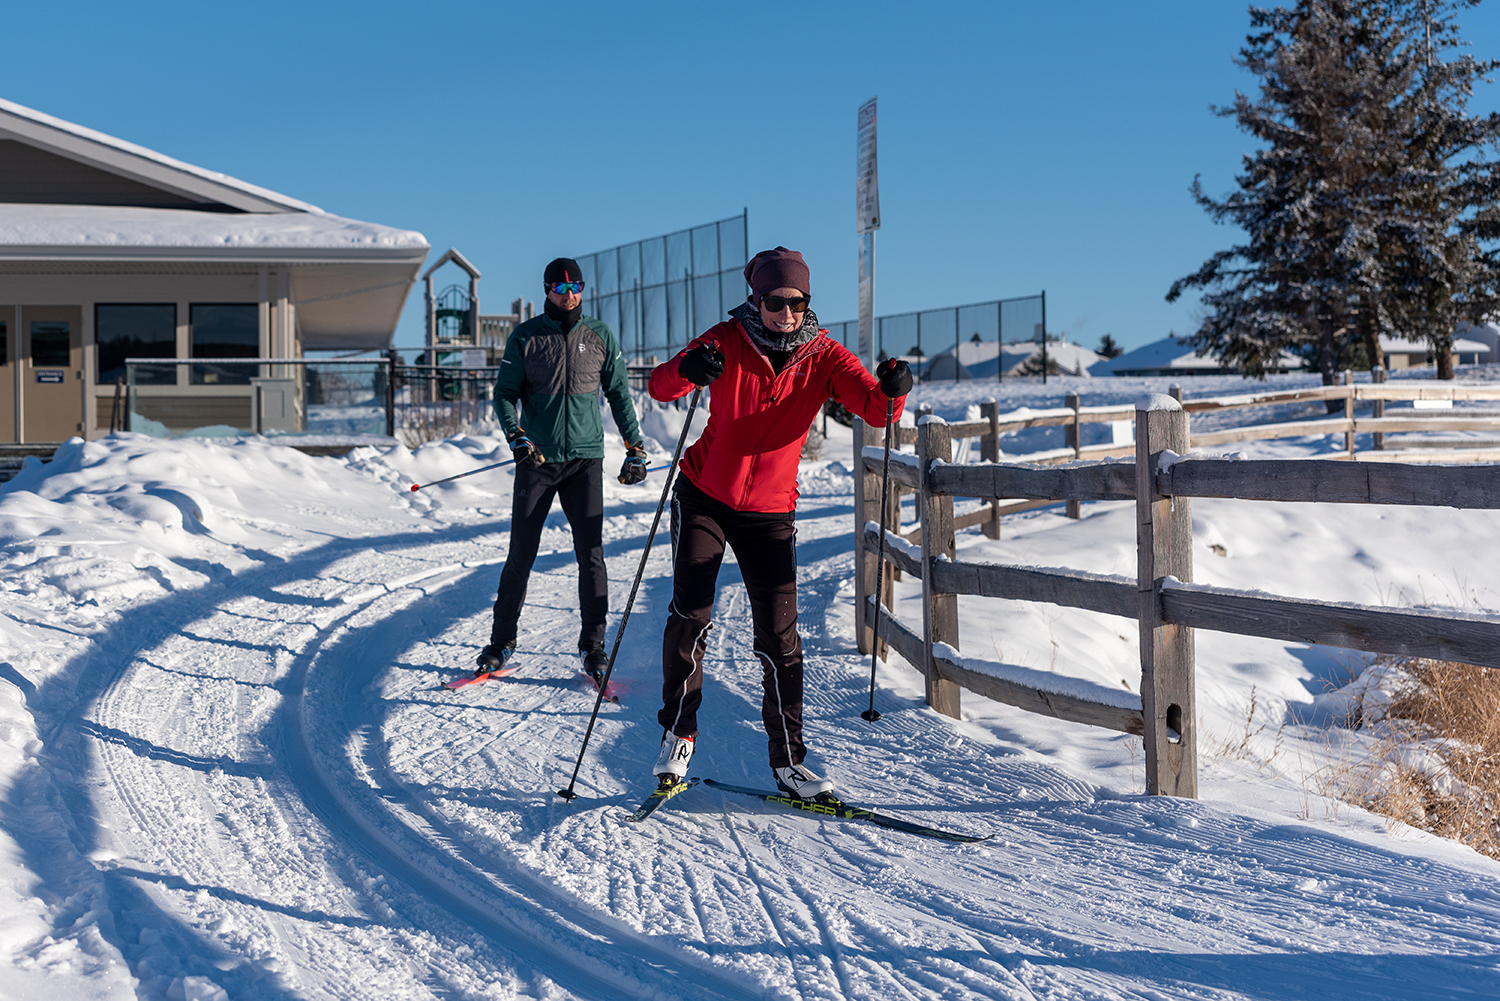 Kamloops Other couple in a ski slope with wooden fences